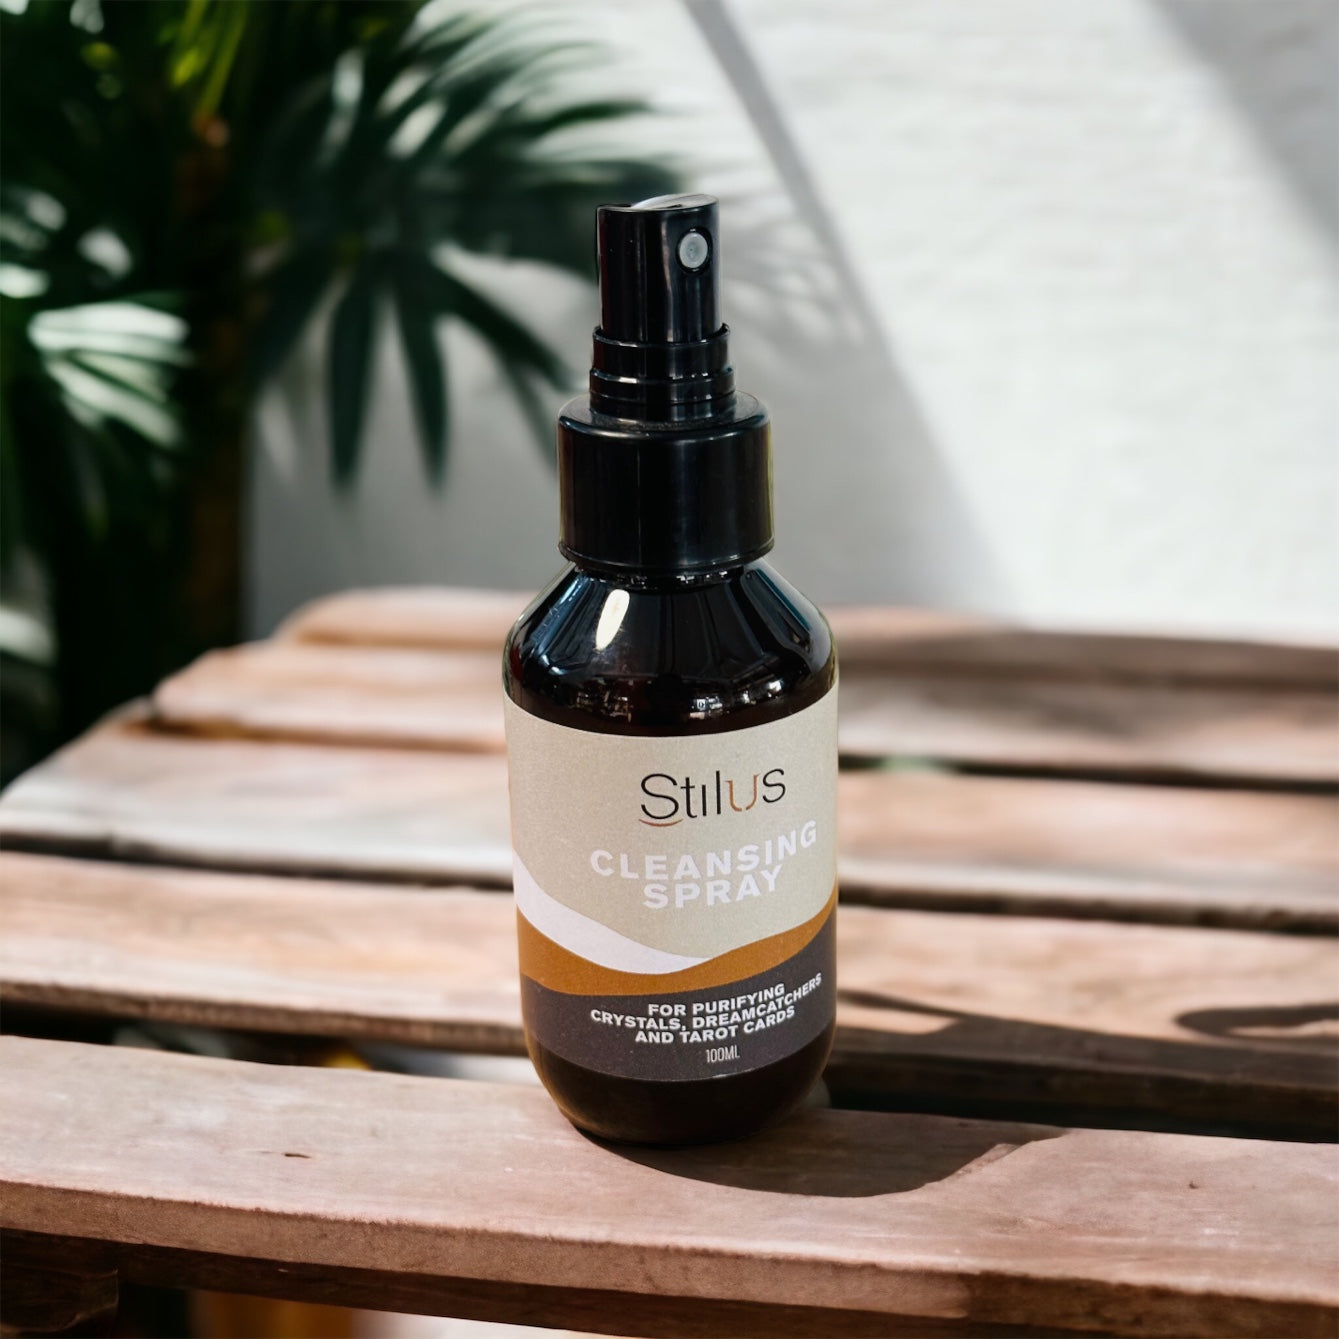 Stilus Cleansing Spray -For purifying Crystals, Dream Catchers & Tarot Cards